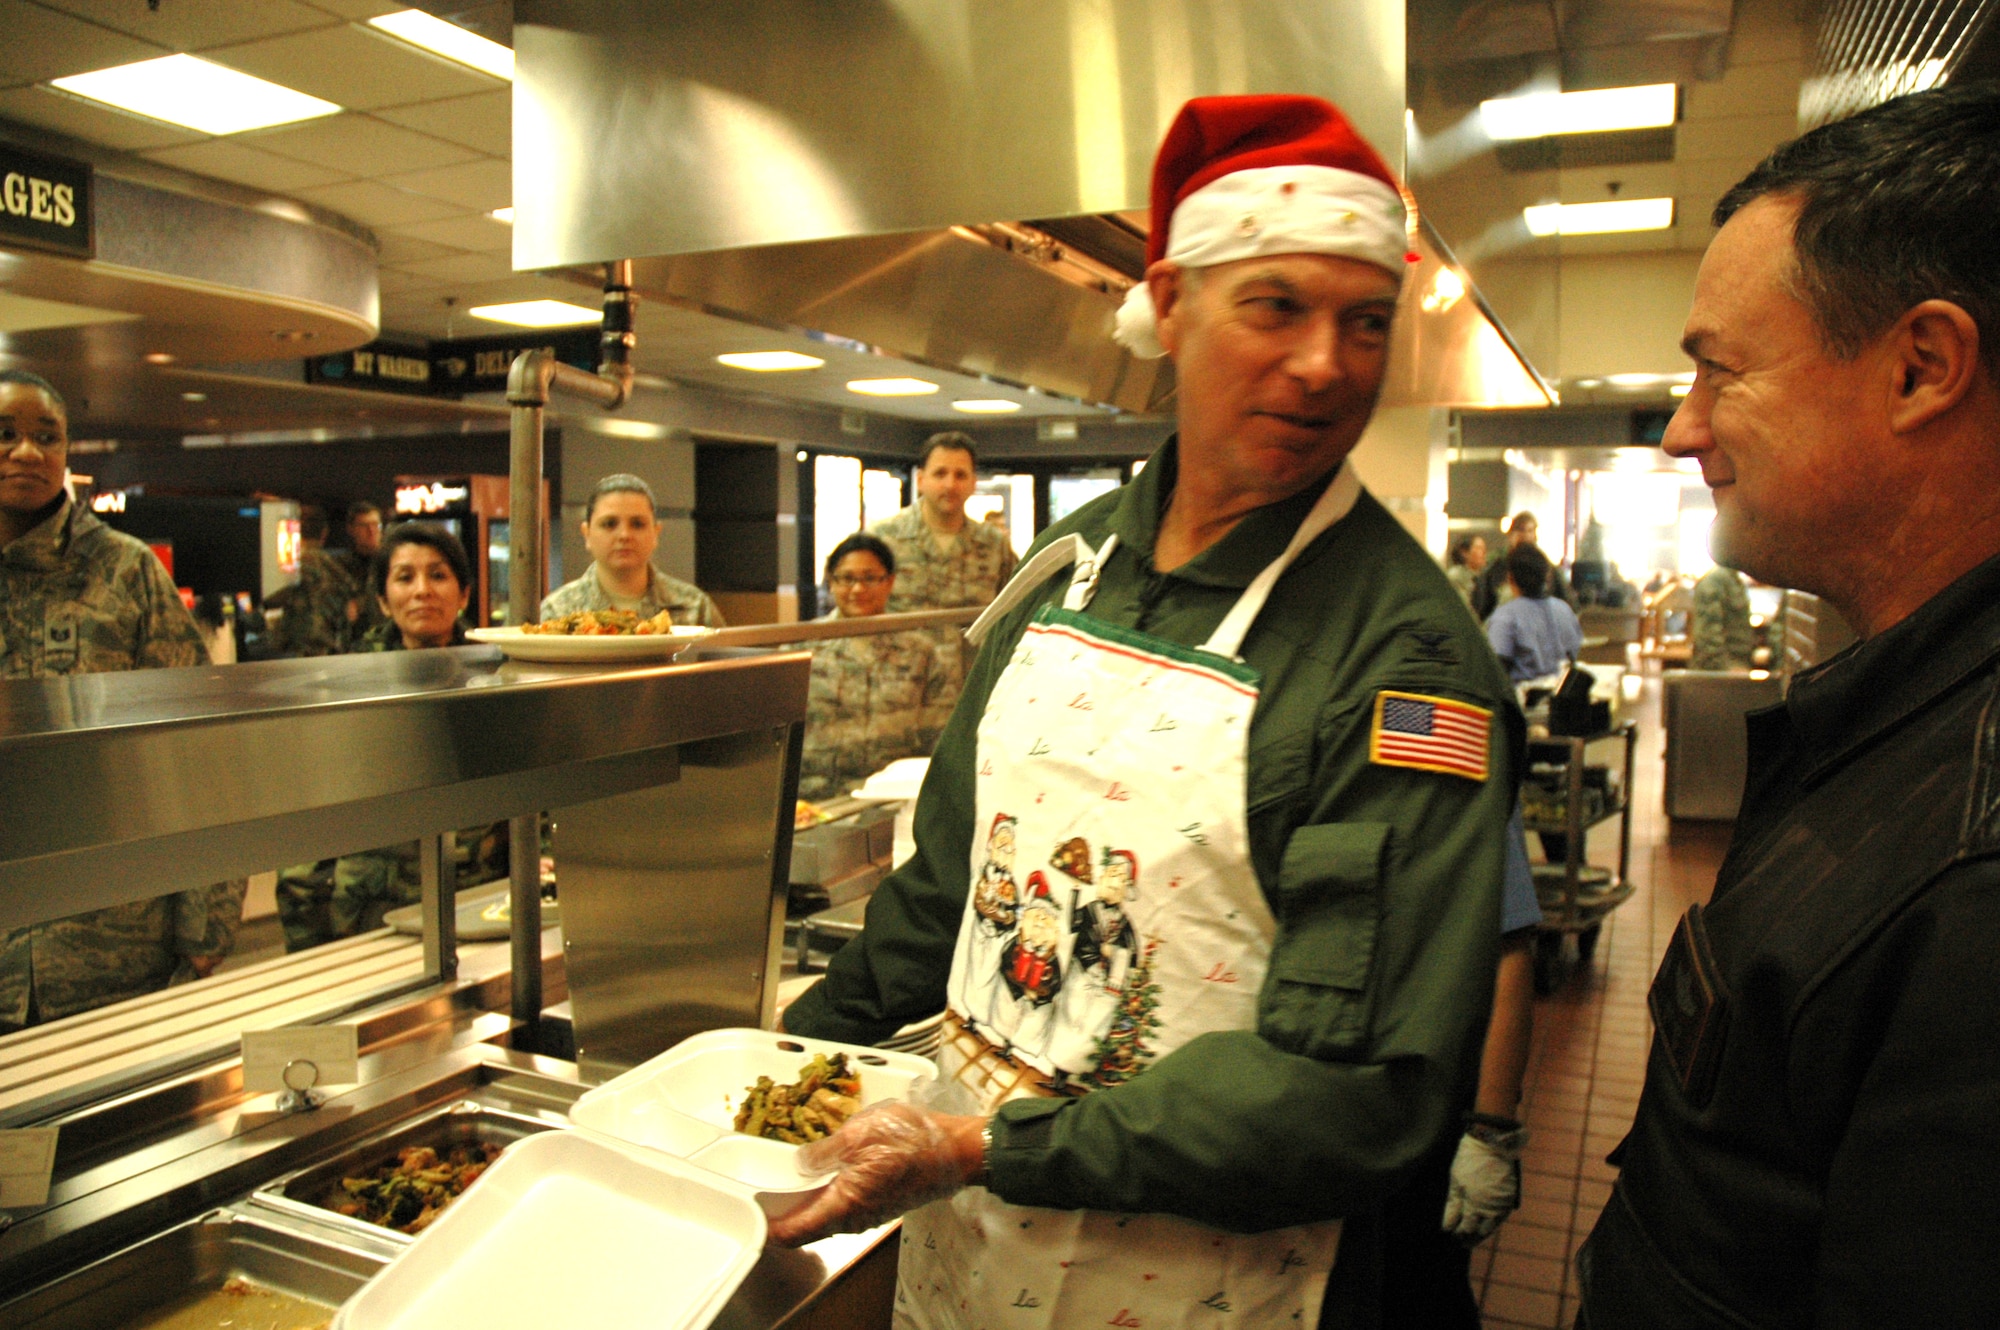 MCCHORD AIR FORCE BASE, Wash.- Col. William Flanigan, left, 446th Airlift Wing commander here, sneaks a quick word in with 446th Operations Group commander, David Pavey, while serving lunch to people of the 446th AW at the Olympic Dining Facility here during the December Reserve weekend. This is one way higher leadership shows its appreciation for all of the hard work and dedication from the members of the wing over the past year.(U.S. Air Force photo/Master Sgt. Jake Chappelle)